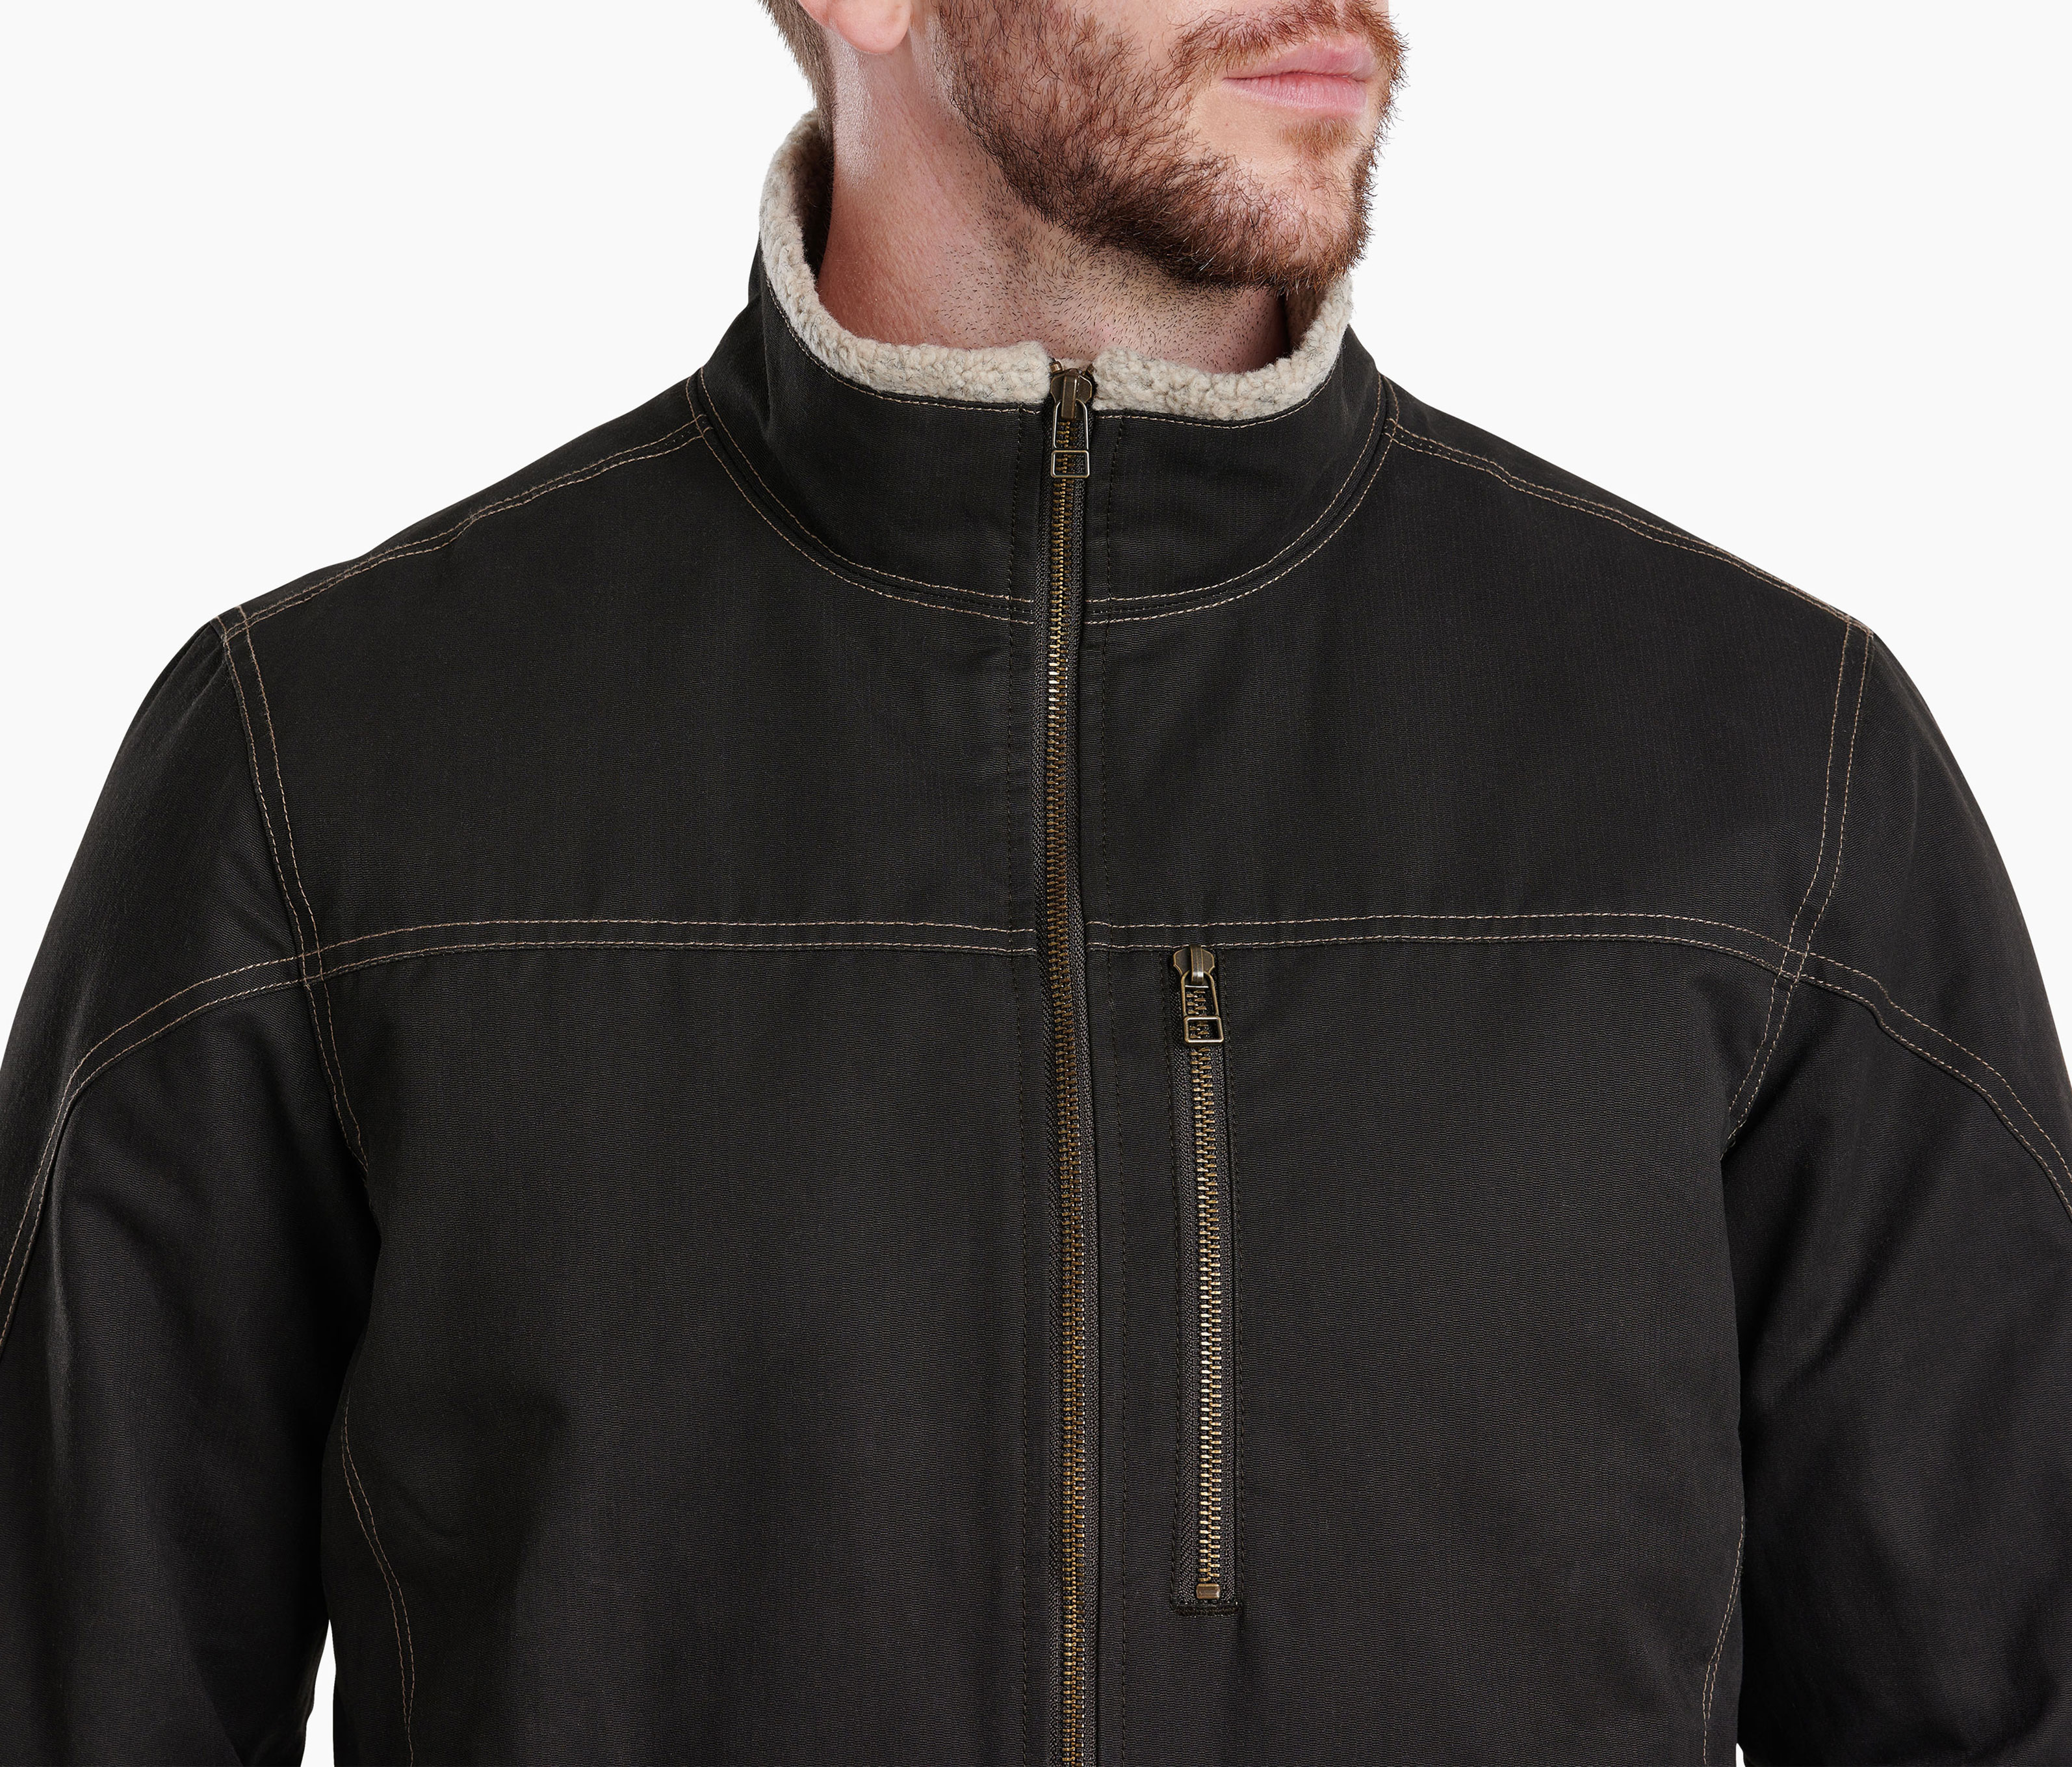 Burr™ Insulated Jacket in Men's Outerwear